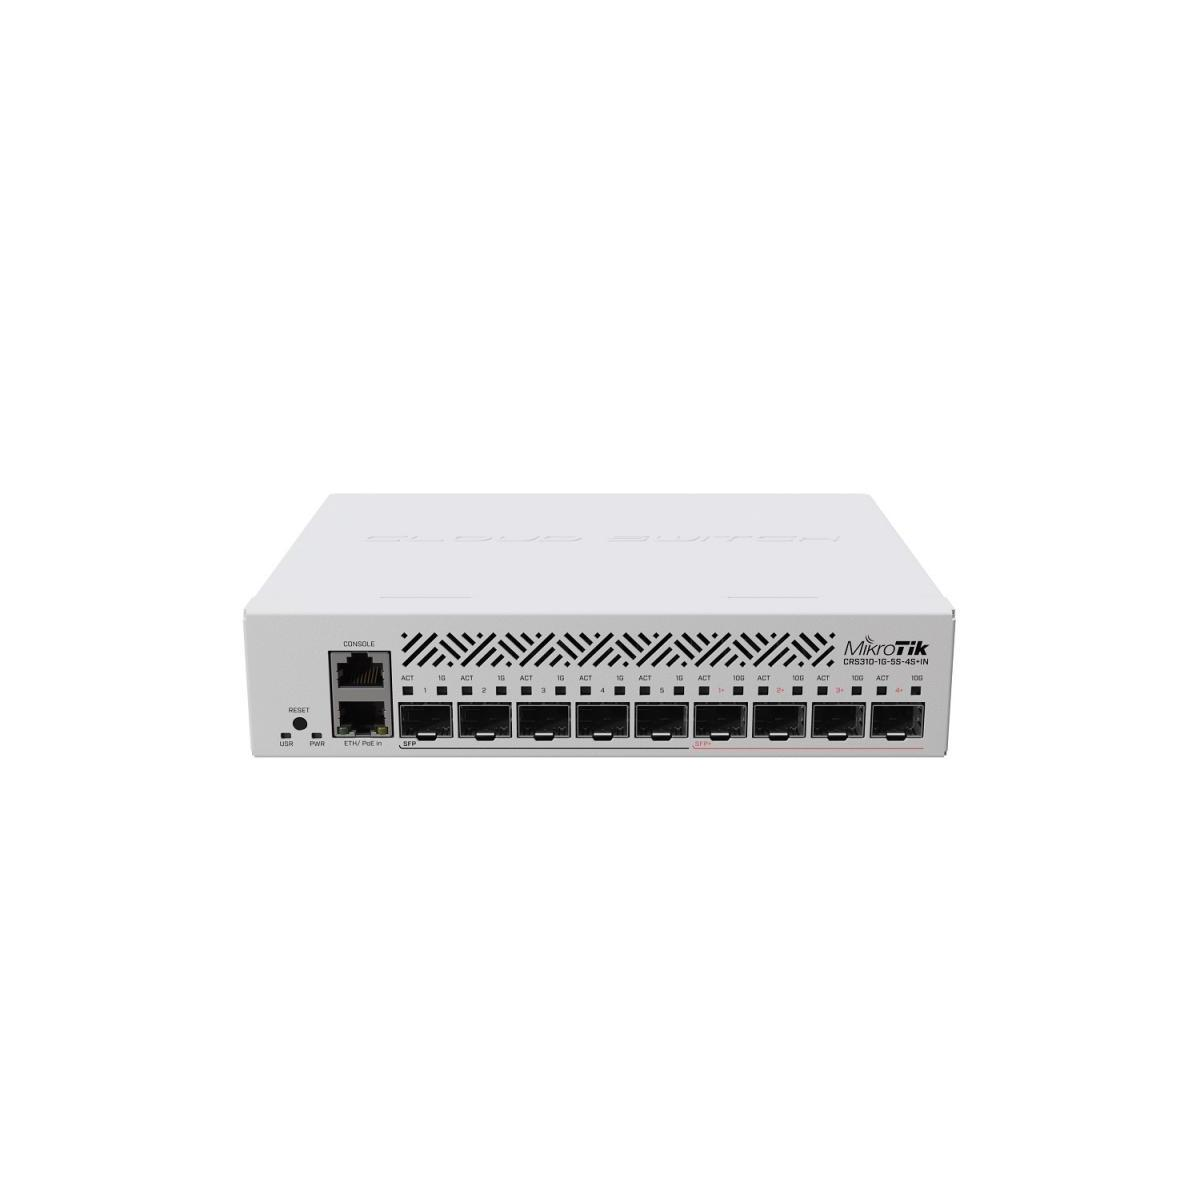 Hubs switch CRS310-1G-5S-4S+IN Switching network 2 Netzwerk Mikrotik Router MIKROTIK